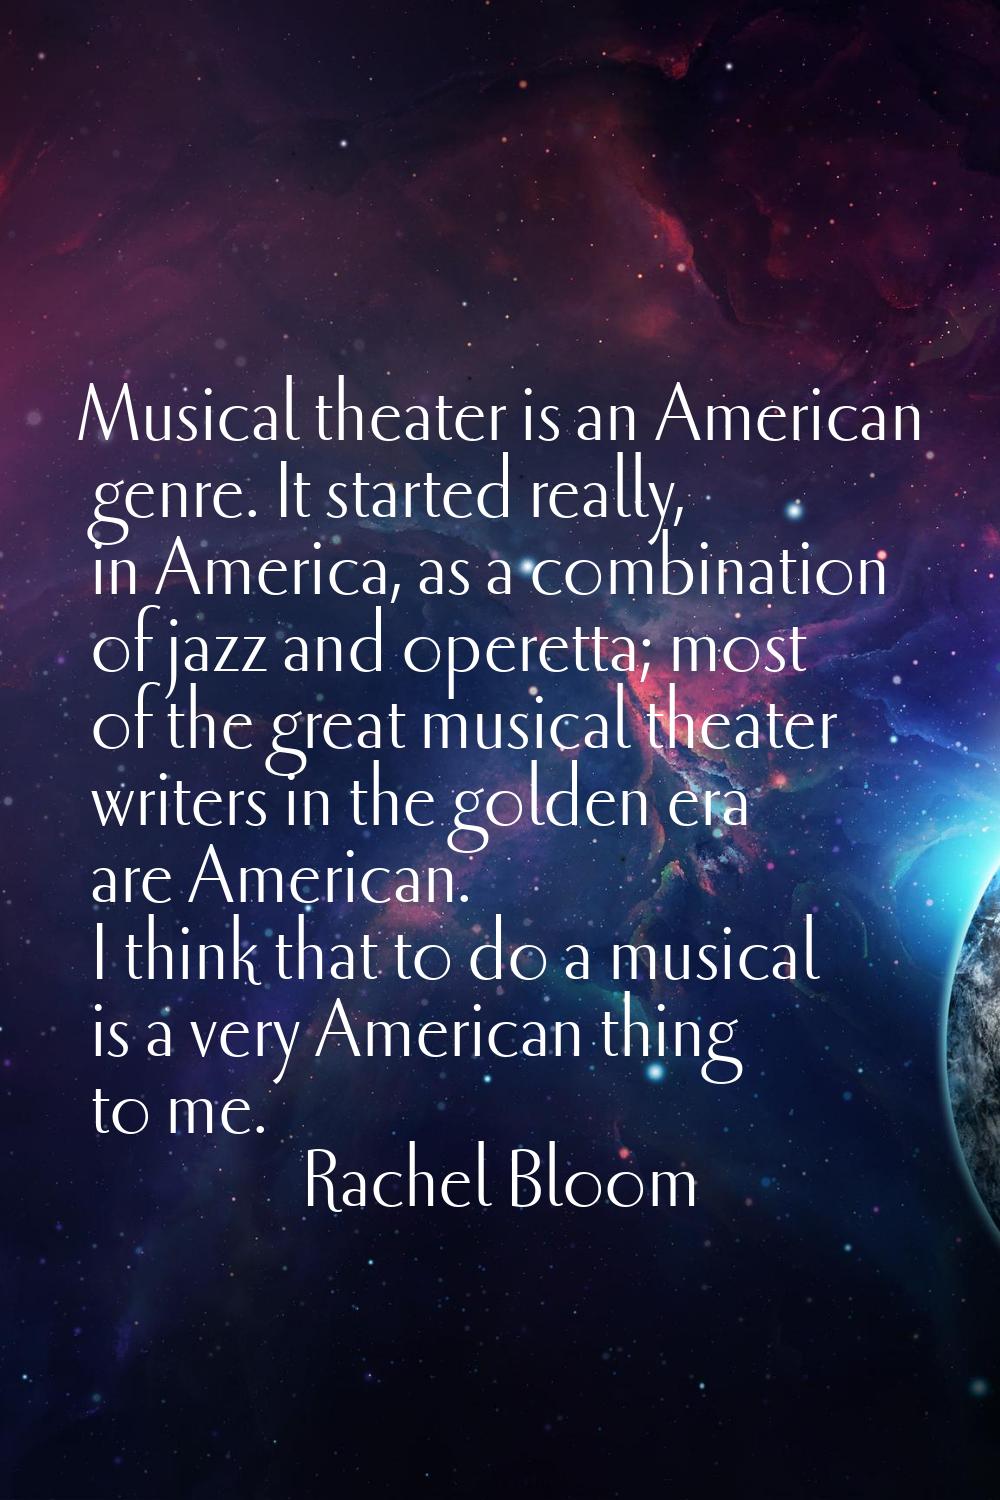 Musical theater is an American genre. It started really, in America, as a combination of jazz and o